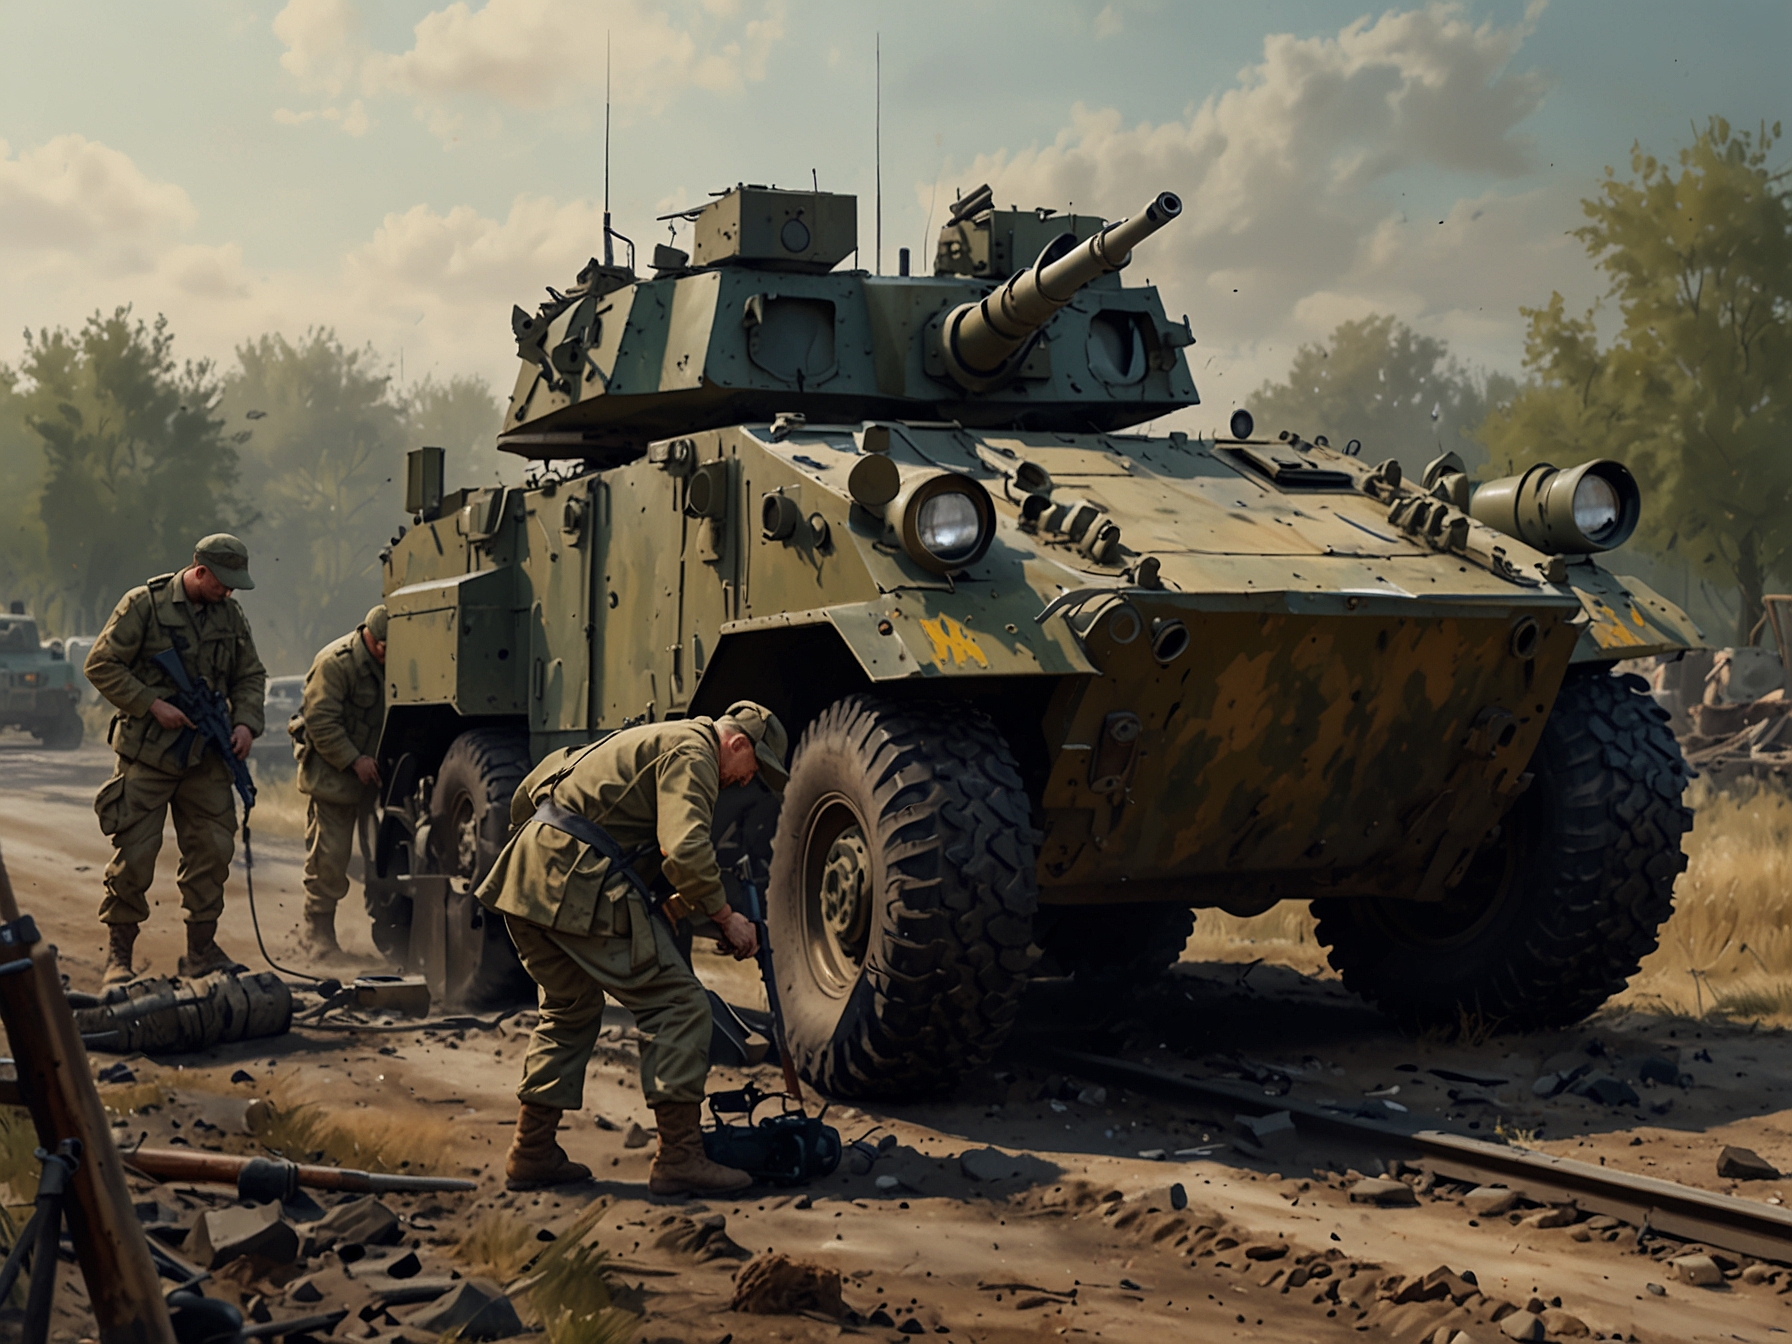 Ukrainian mechanics work tirelessly to repair a line of damaged armoured vehicles, showcasing the intensive maintenance needed to keep them operational during warfare.